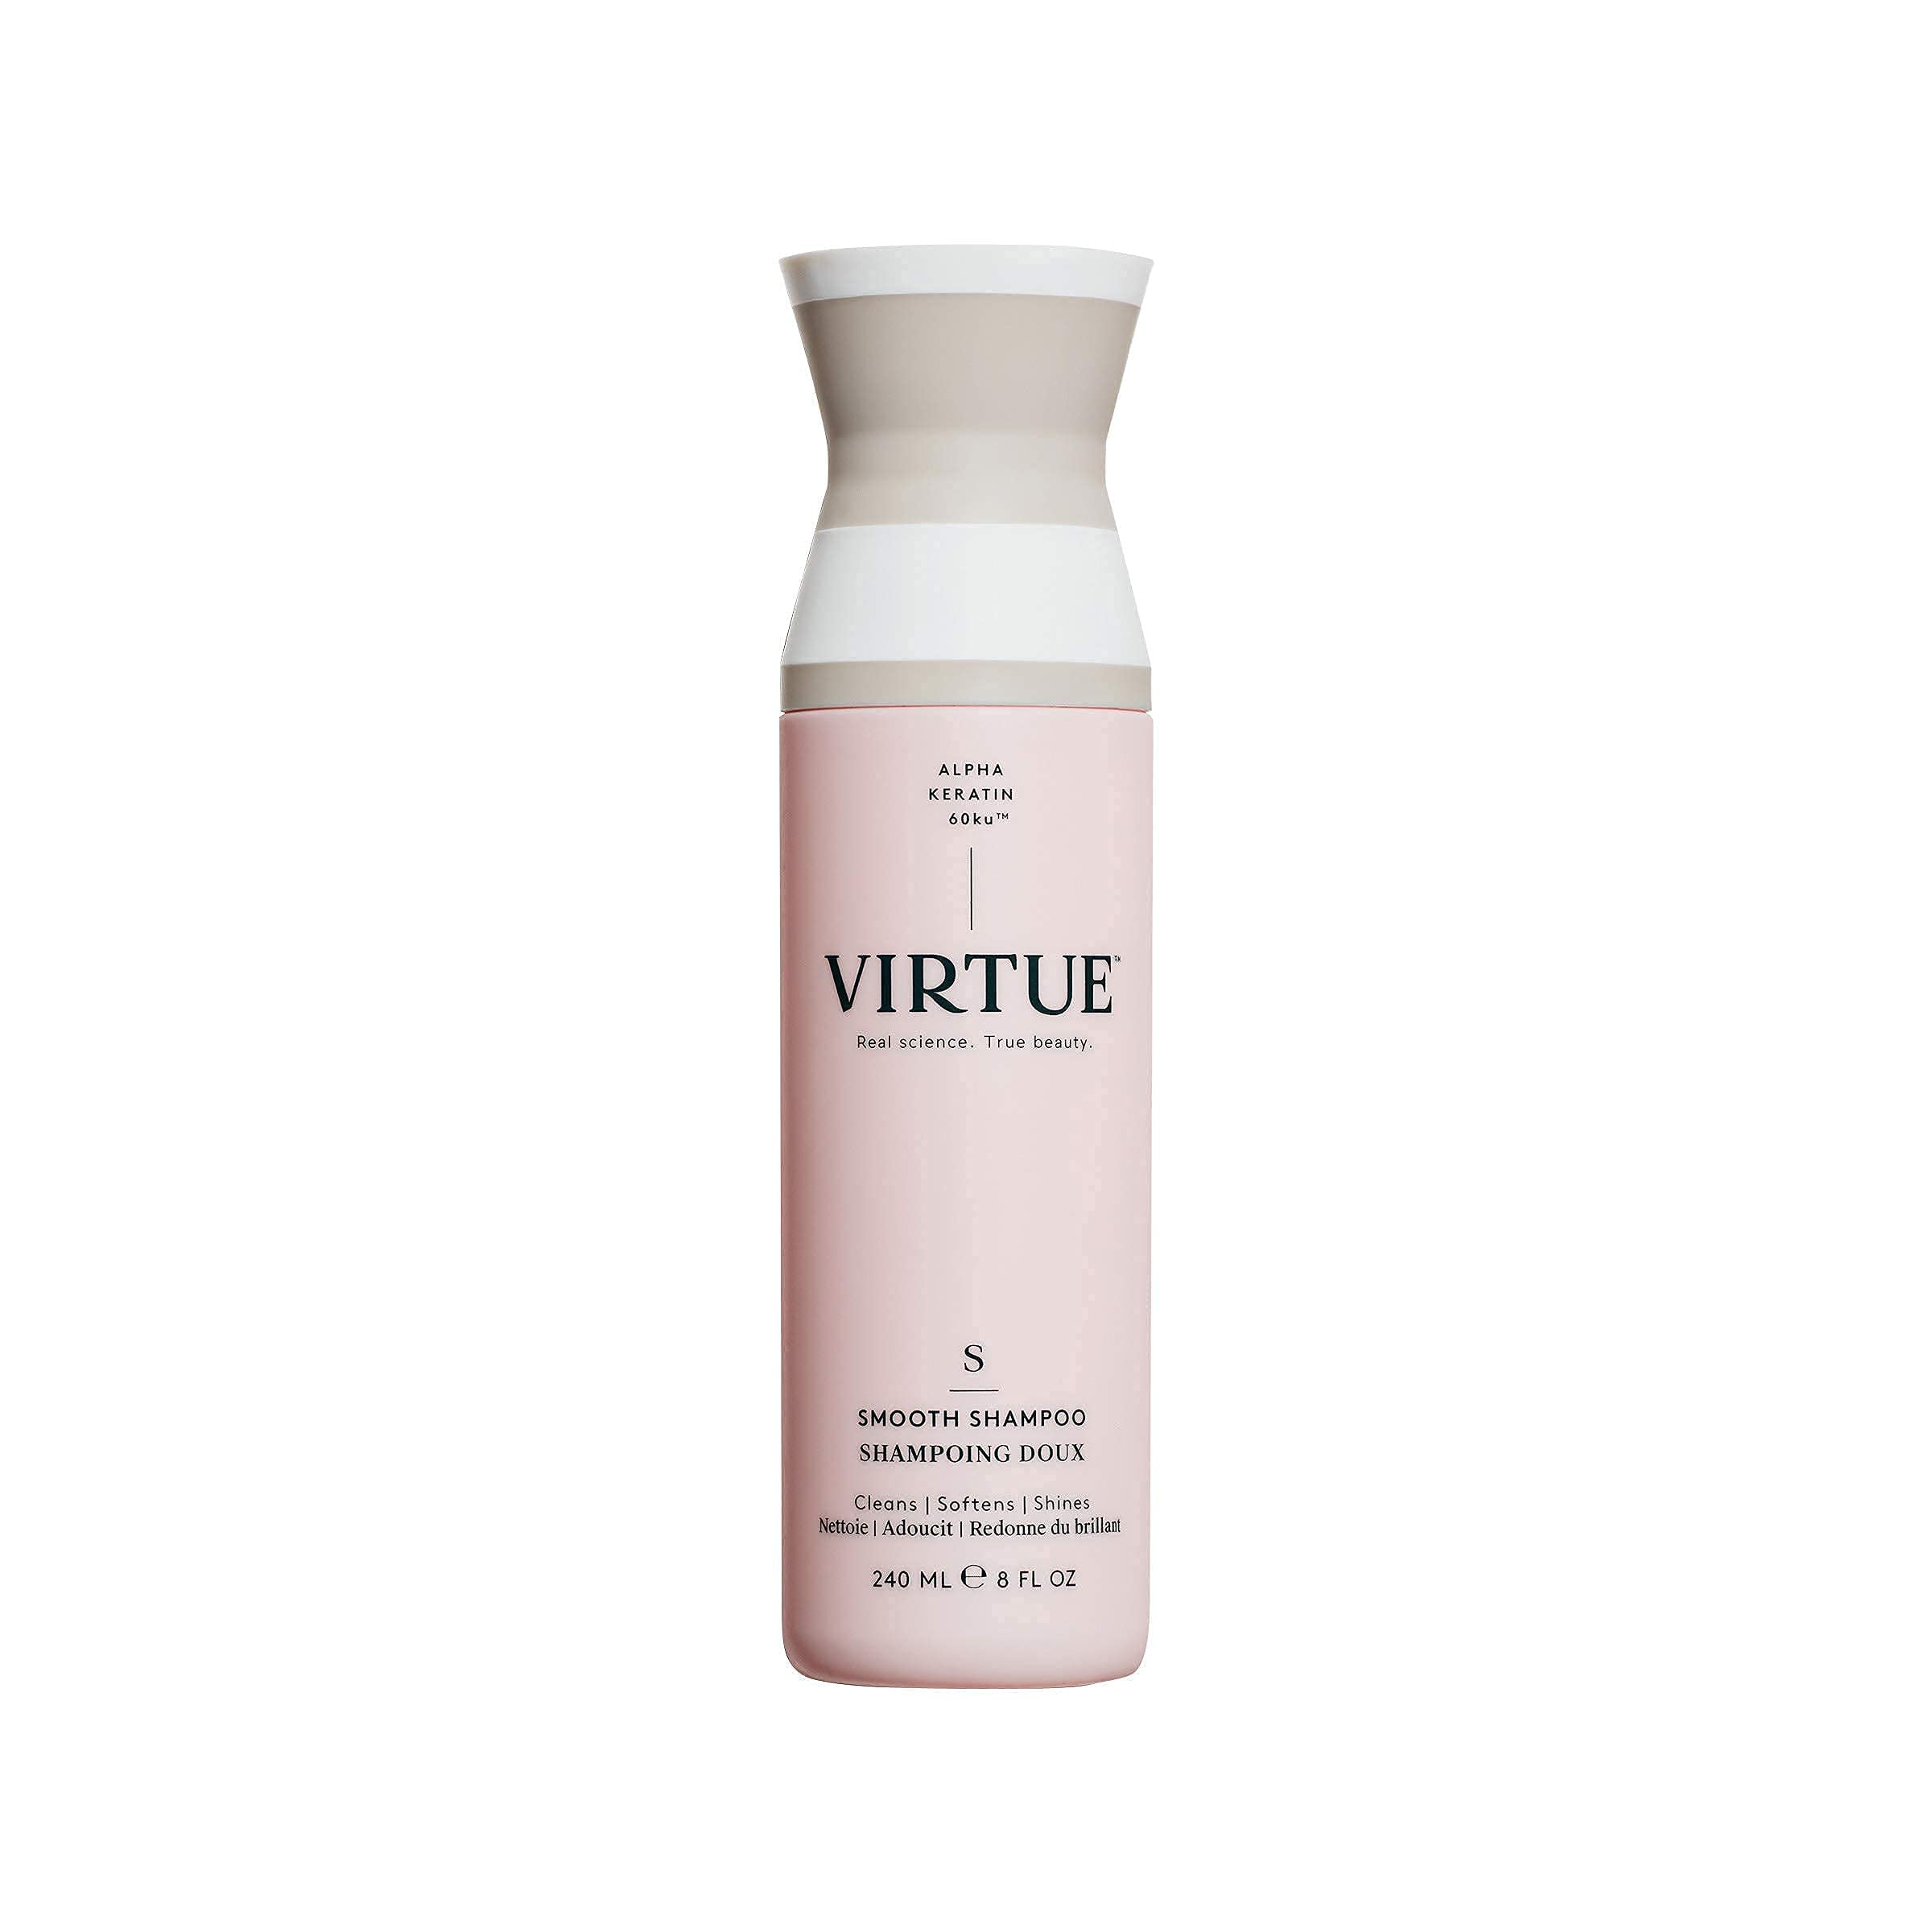 VIRTUE Smooth Shampoo & Conditioner Set | Full Size | Alpha Keratin Smooths Frizzy, Coarse, Curly Hair | Sulfate Free, Paraben Free, Color Safe